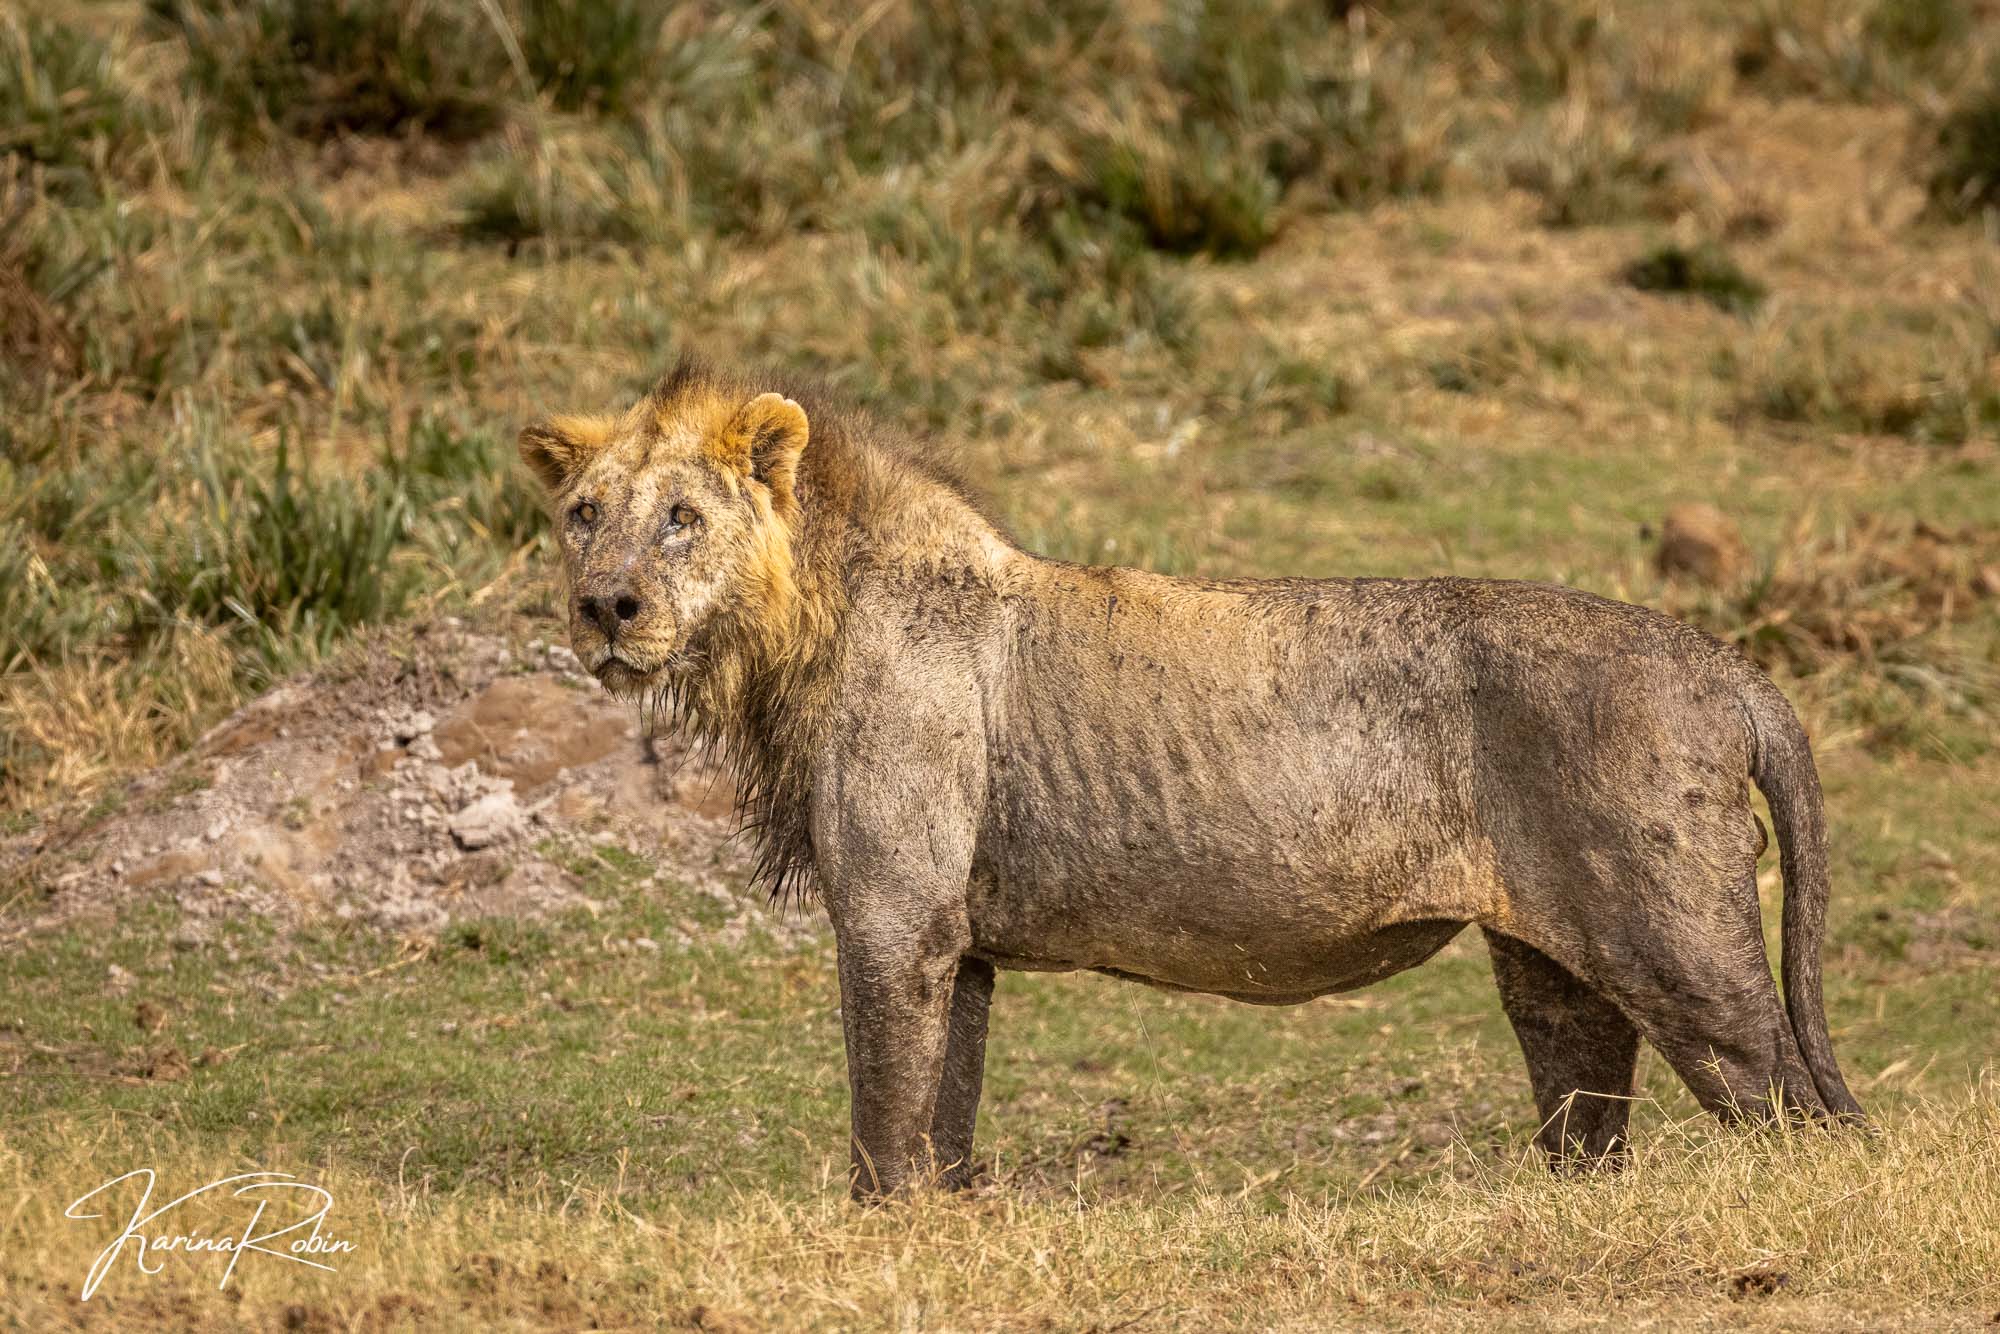 KENYA - The tragic end of the oldest wild lion LOONKITO